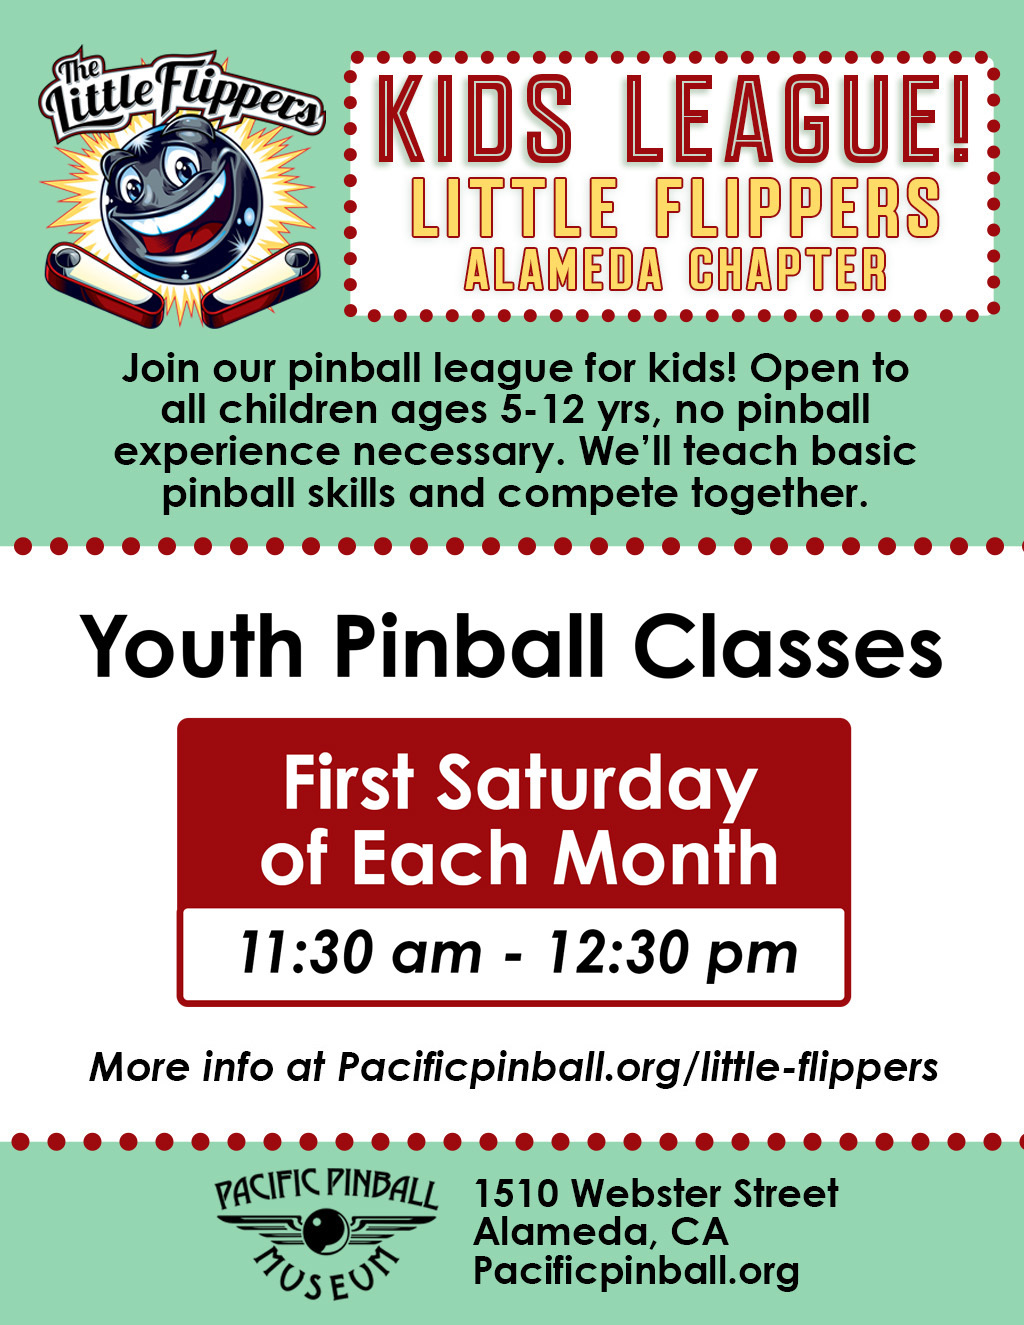 Pacific Pinball Museum Flippers KIDS LEAGUE in Alameda! promotion flier on Digifli.com